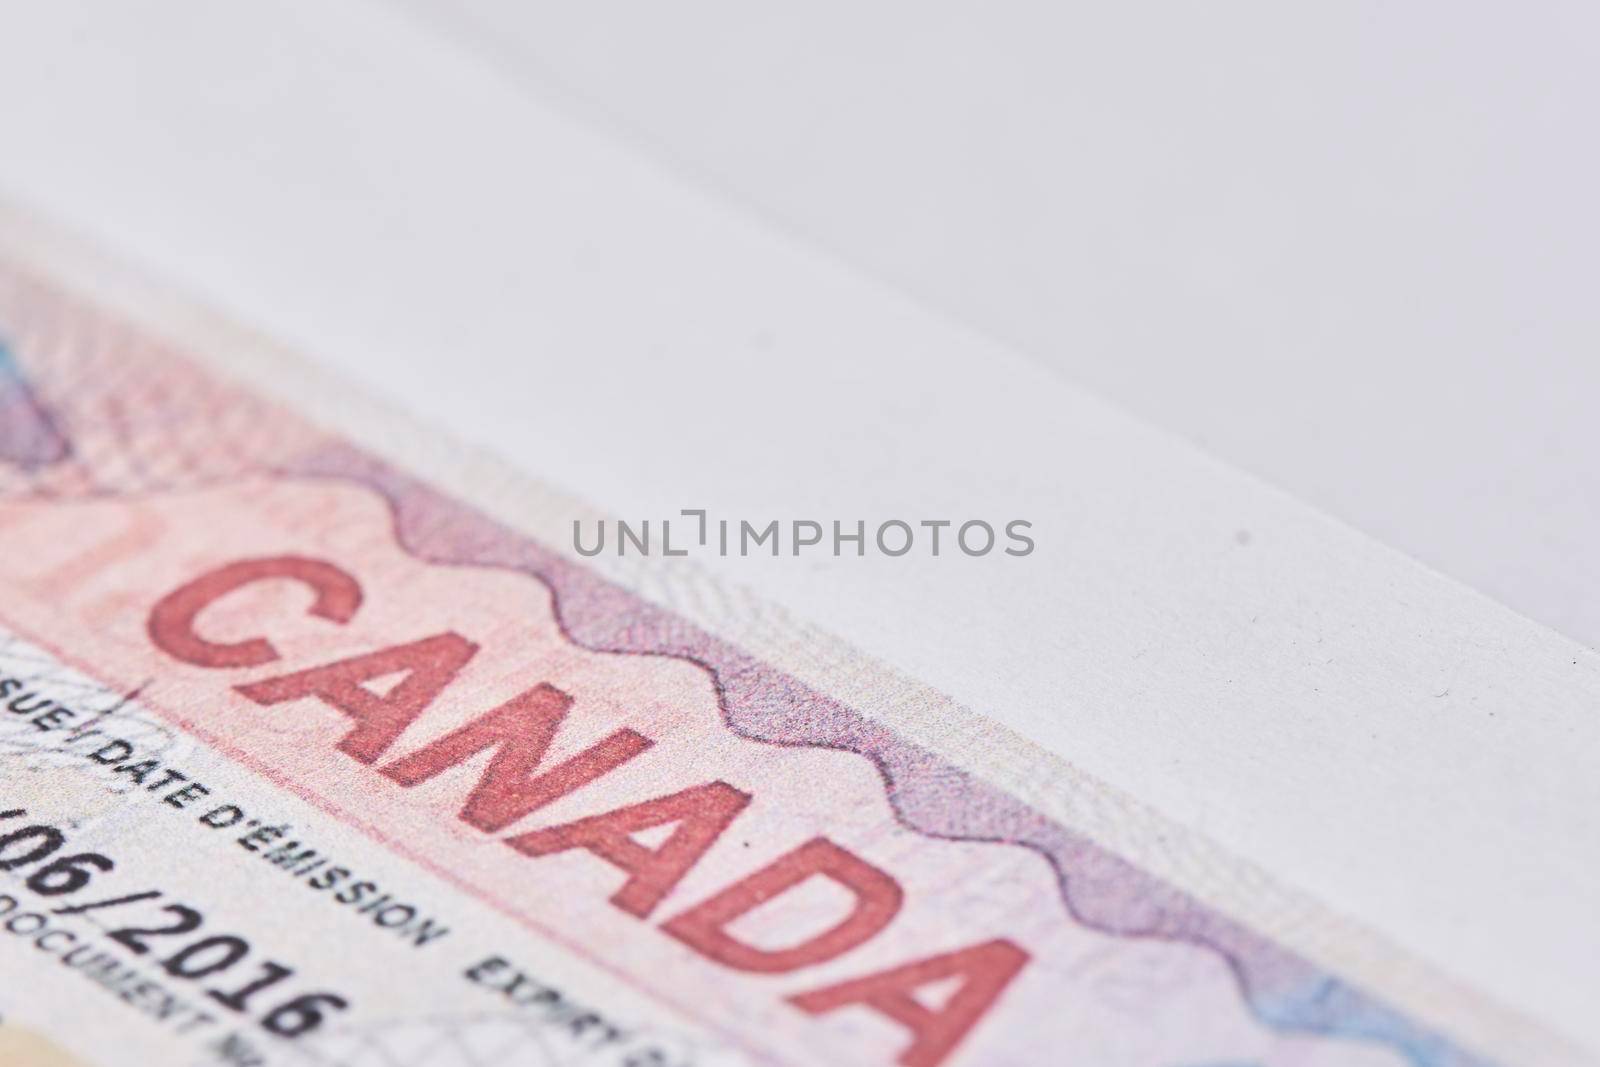 Canadian visa in passport. Close-up view by golibtolibov